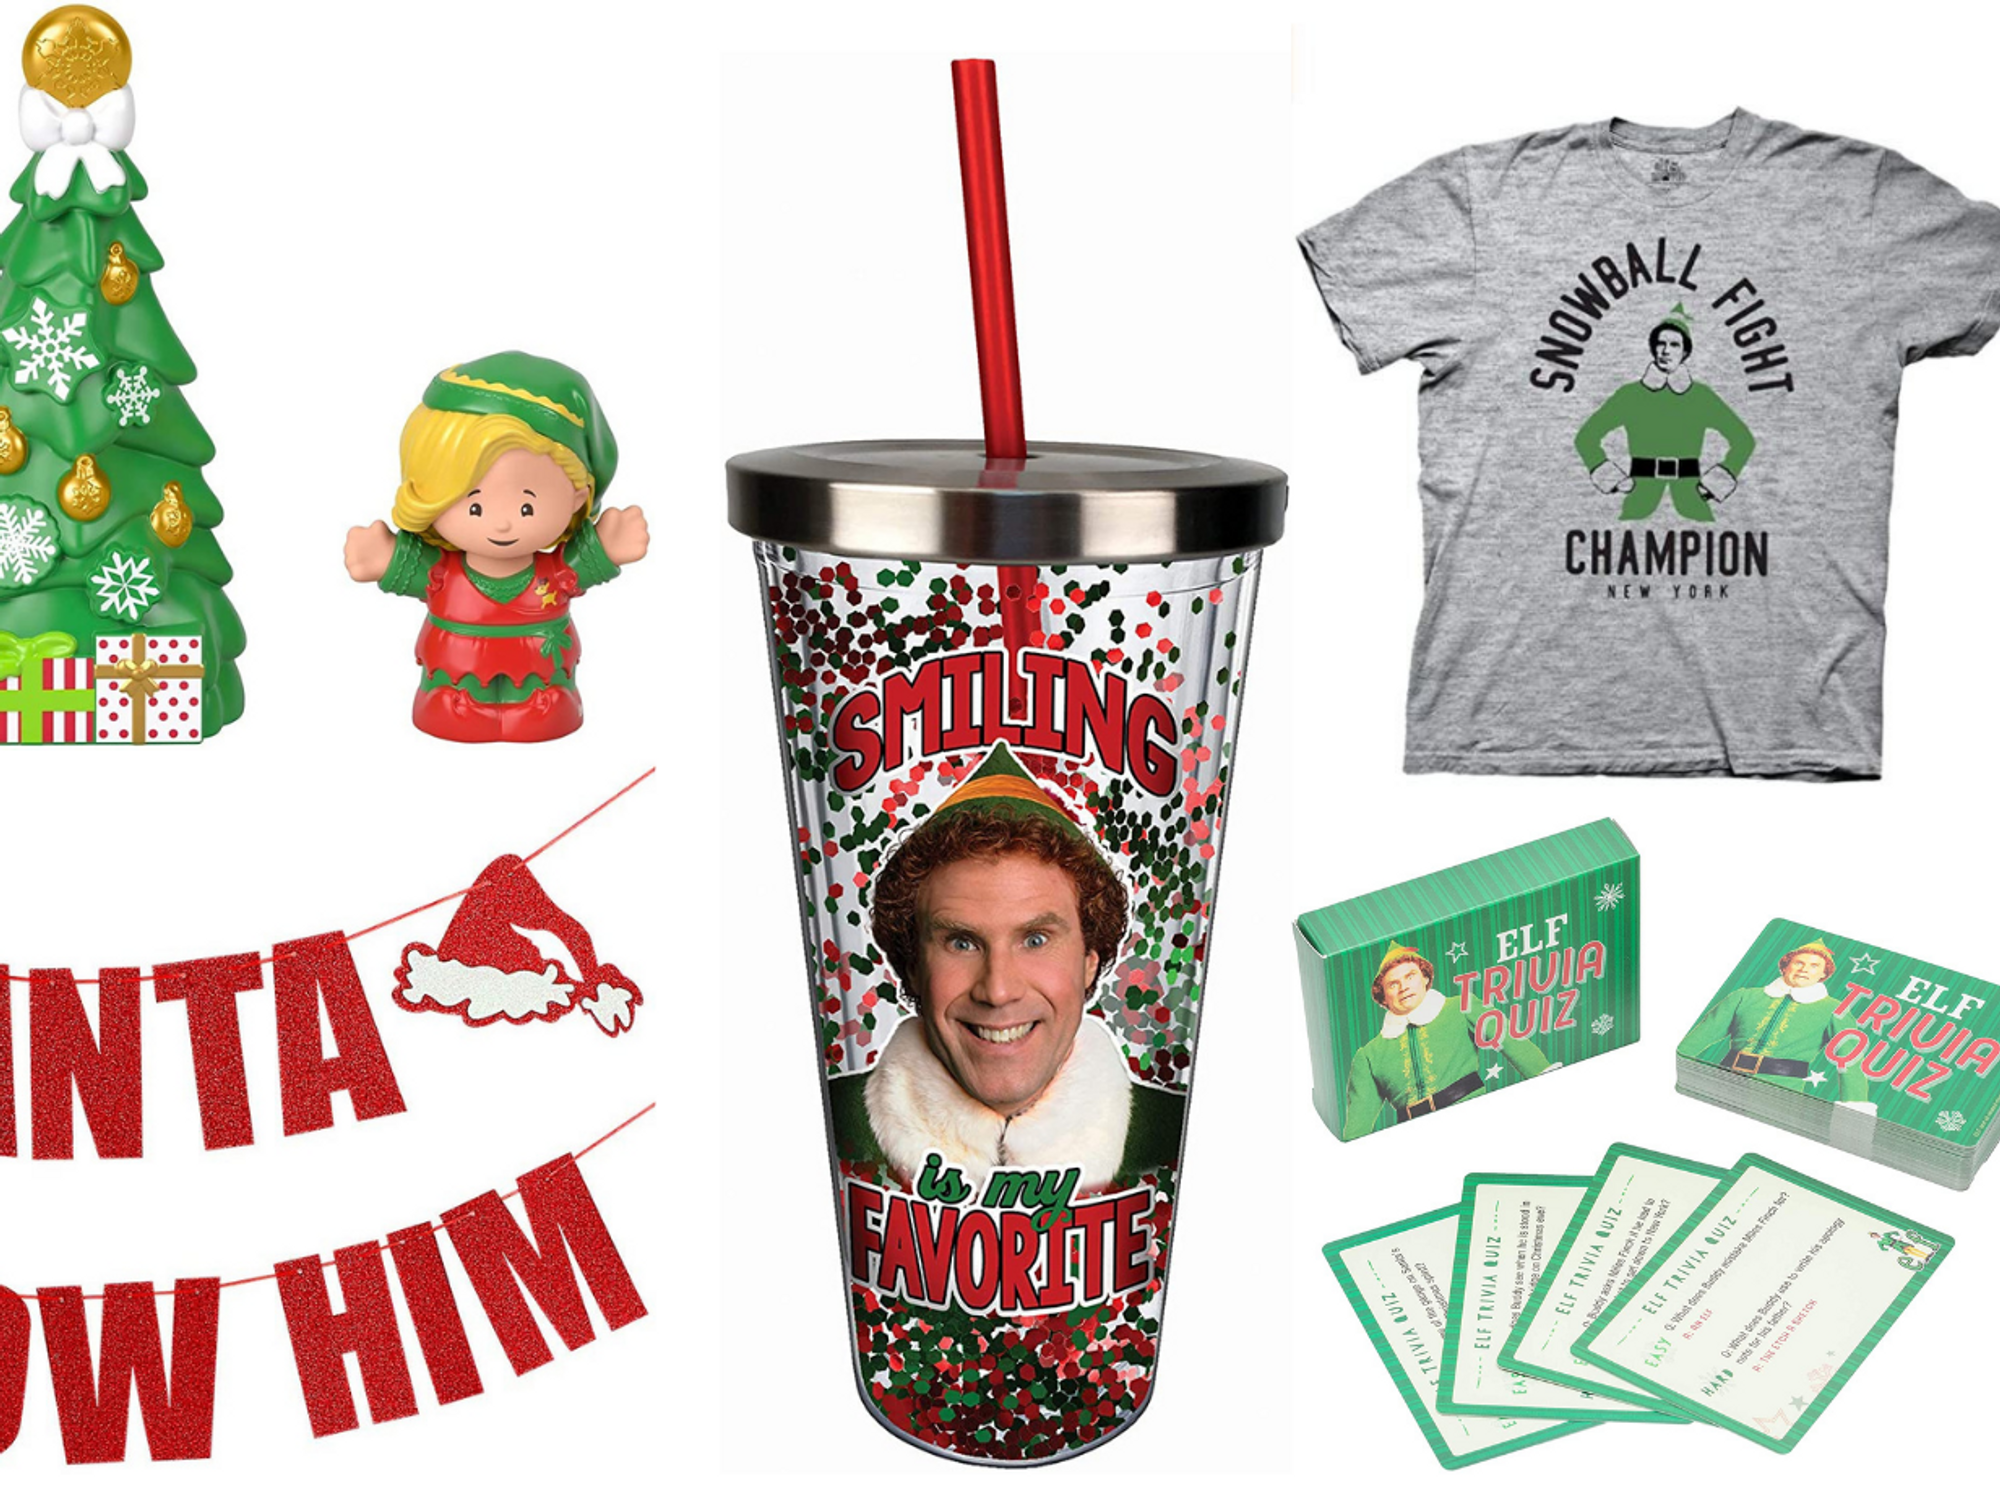 Buddy the Elf Cup -   Buddy the elf, The elf, Elf movie party